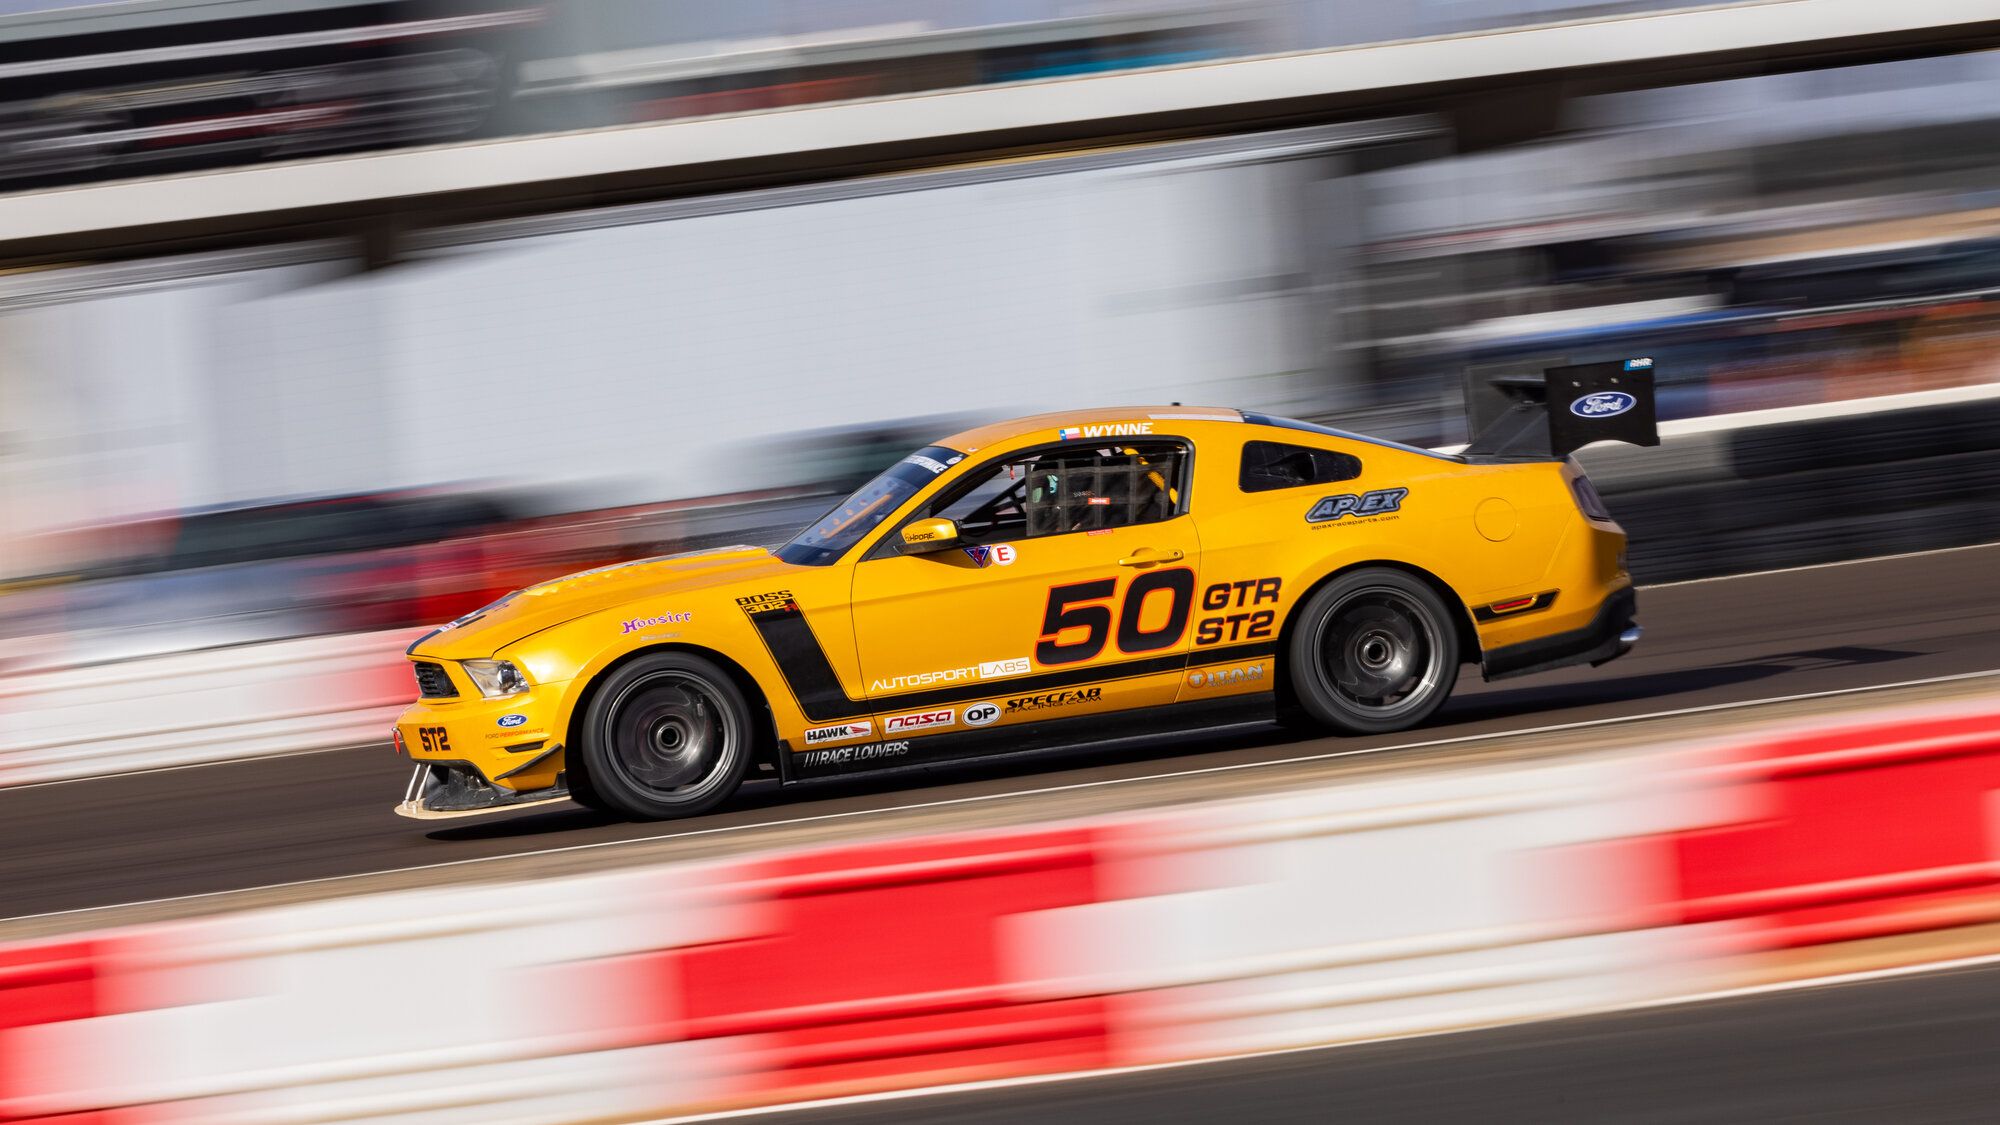 2011 Mustang
GT_50L Road Race -  (FTWMS #50 S197 NASA Super Touring Racecar)